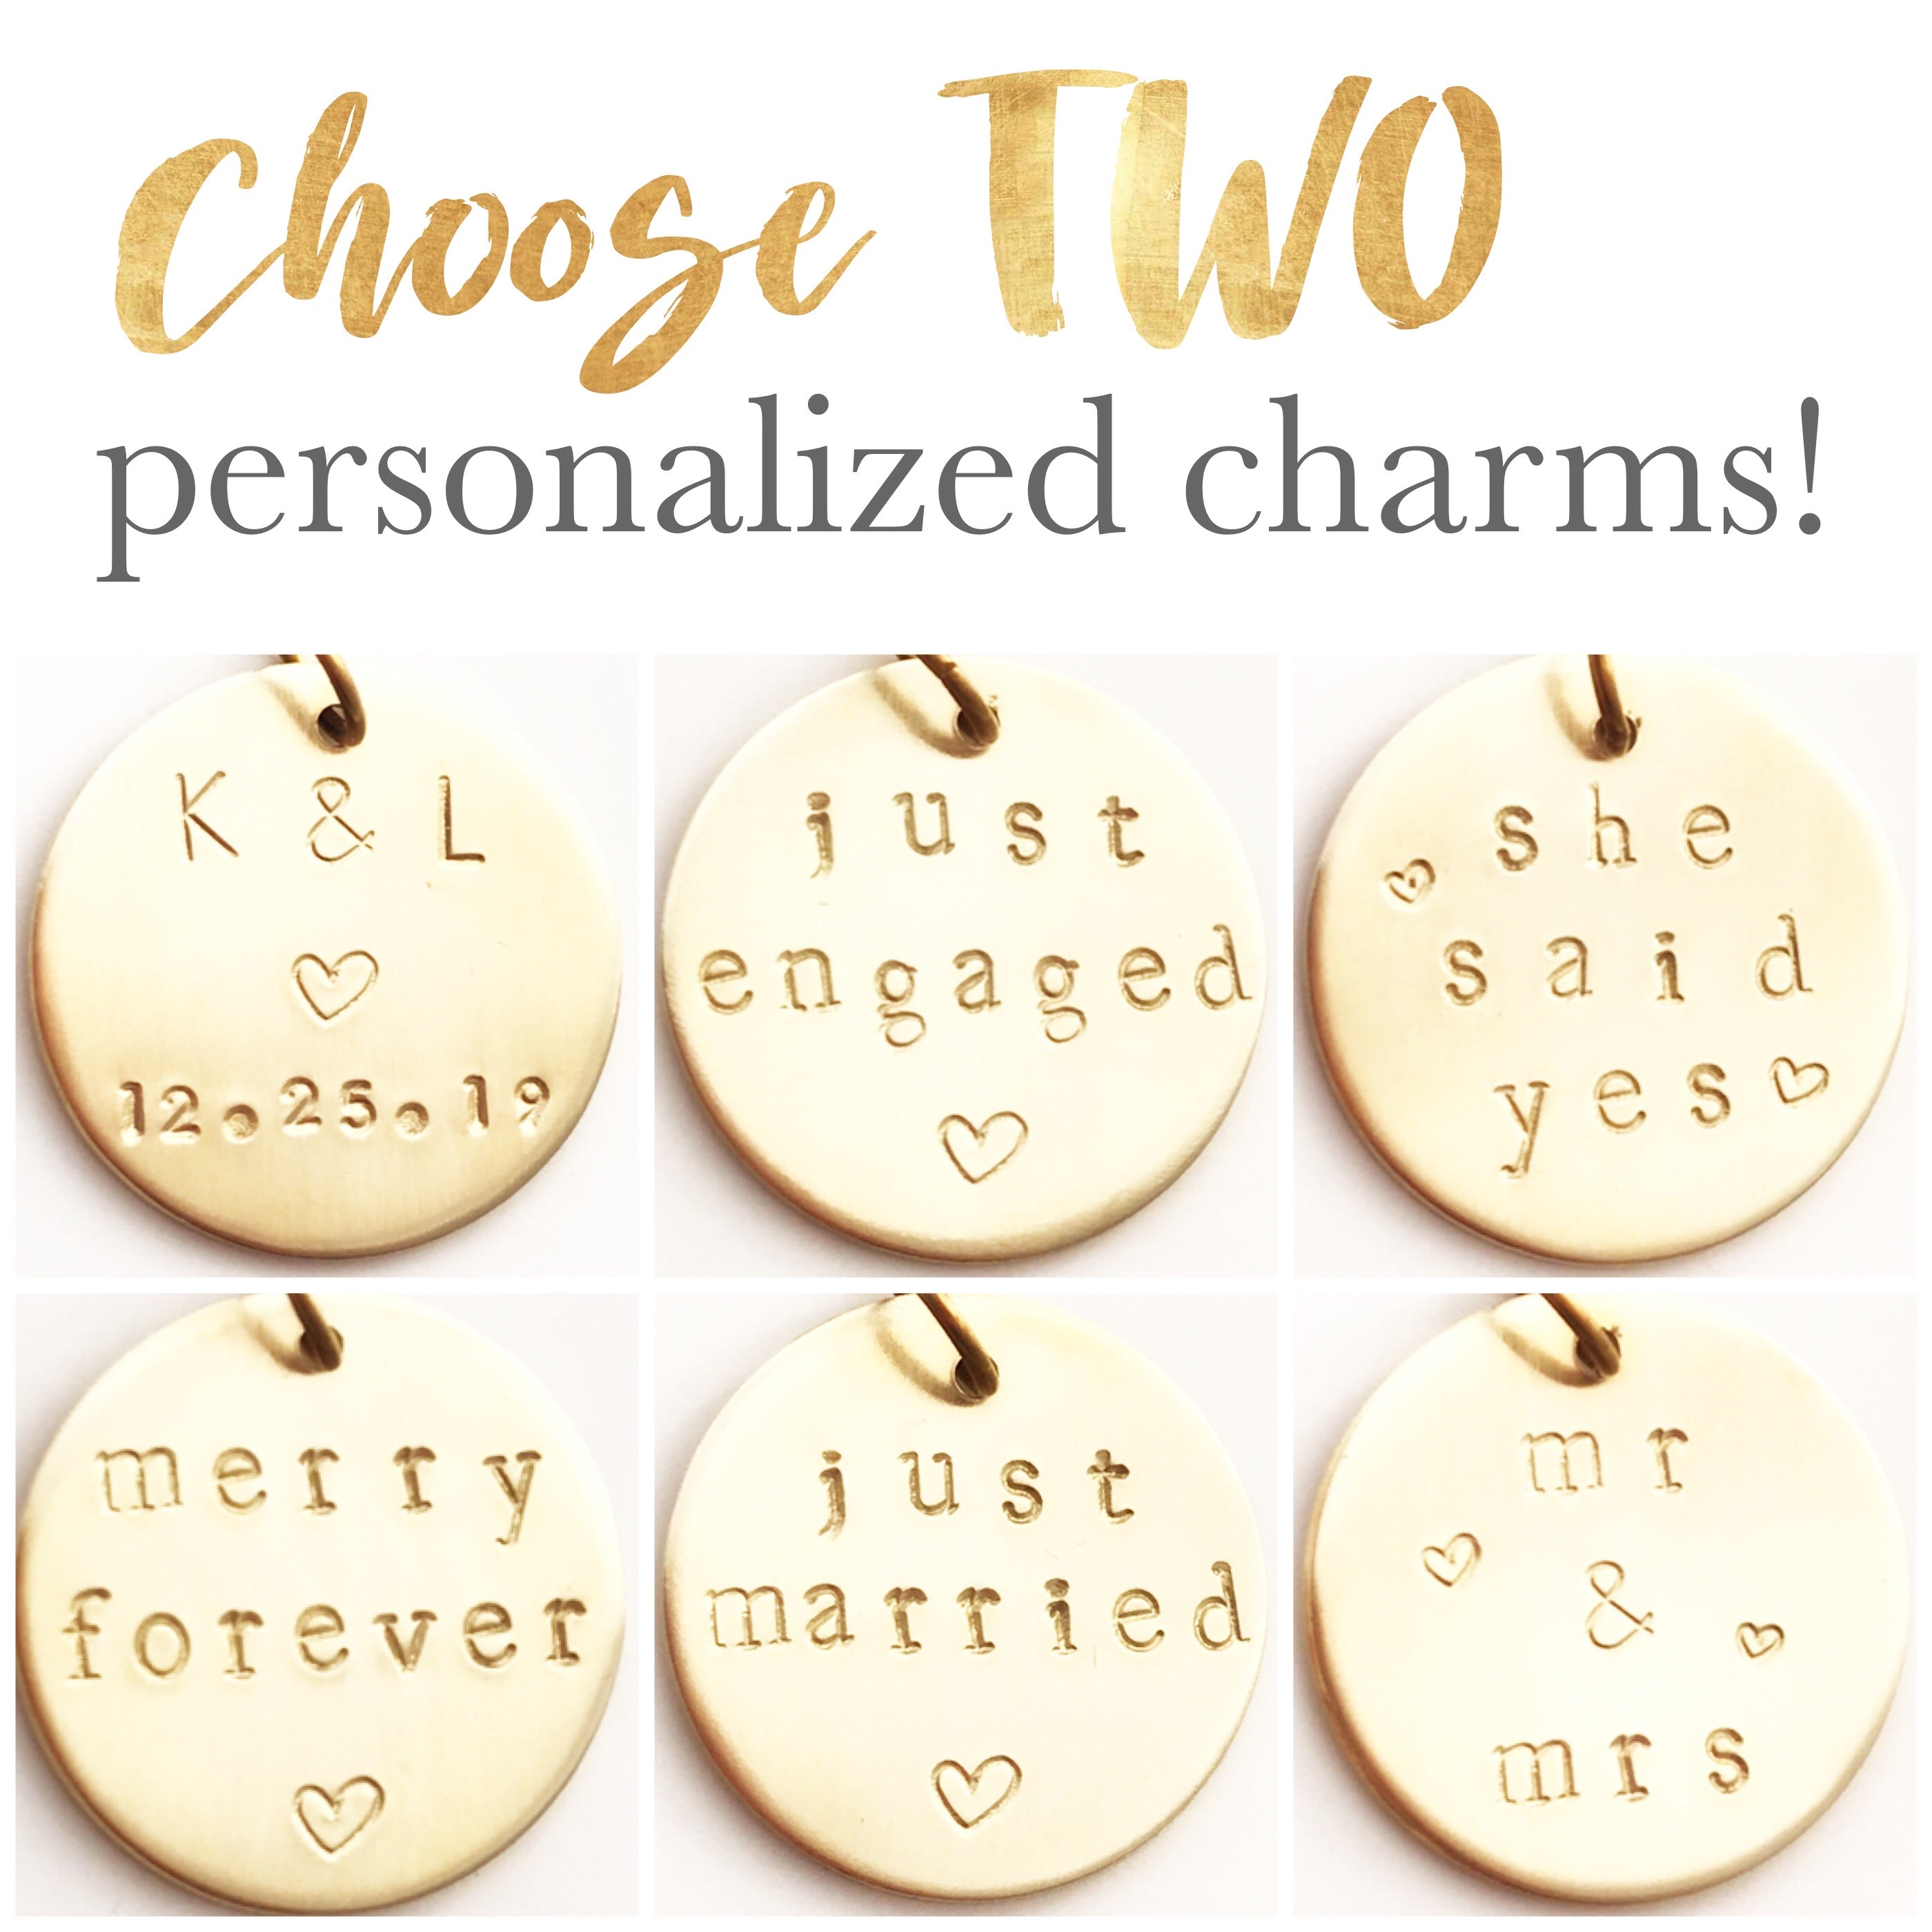 Personalized Wedding Gifts | The Cutest Wedding Gift Ideas